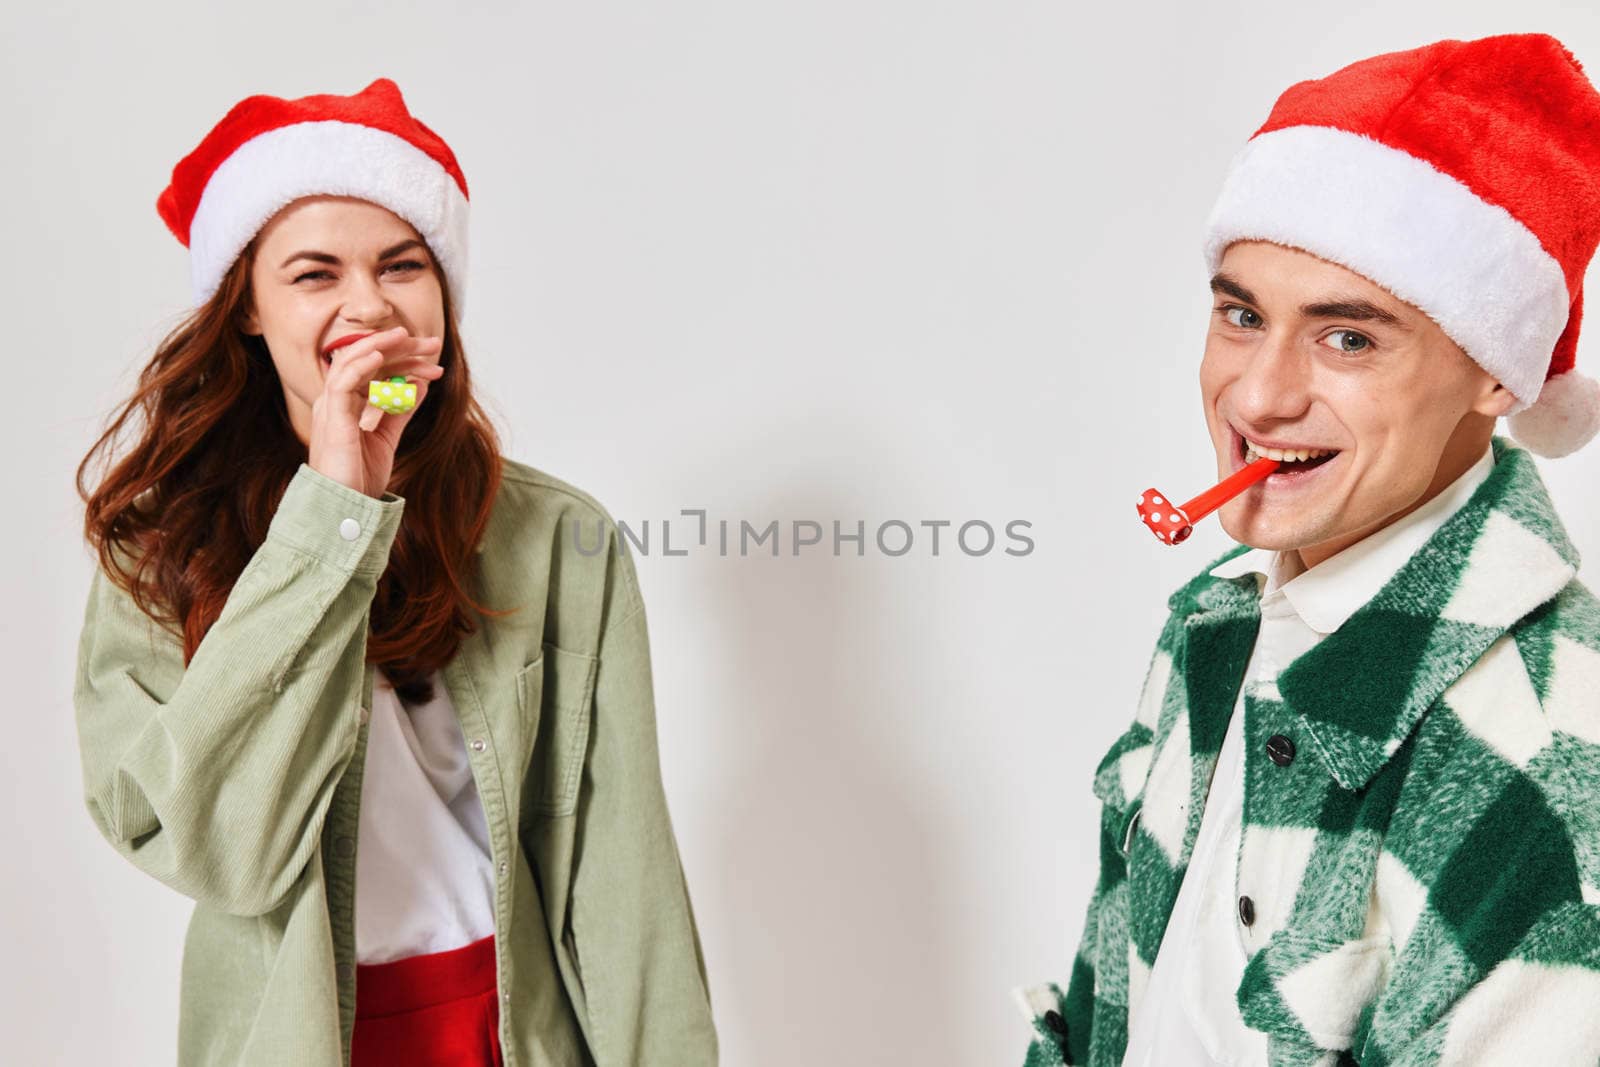 Cheerful man and woman festive pipes Christmas New Year hats fun. High quality photo